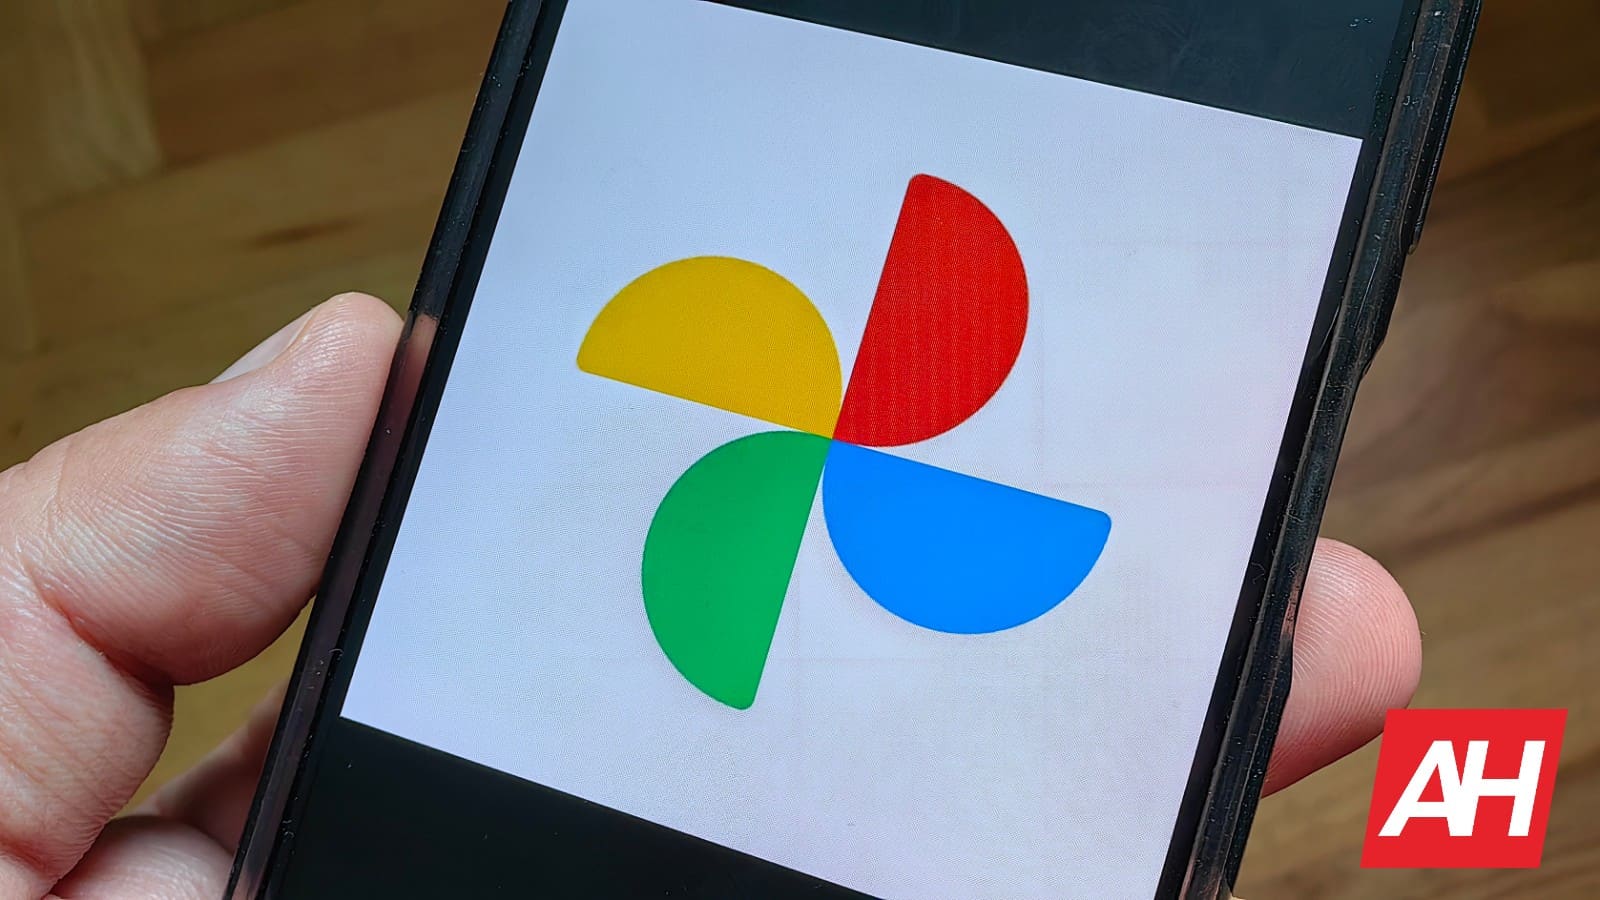 Google Photos is set to get the 'Photo Stack' feature